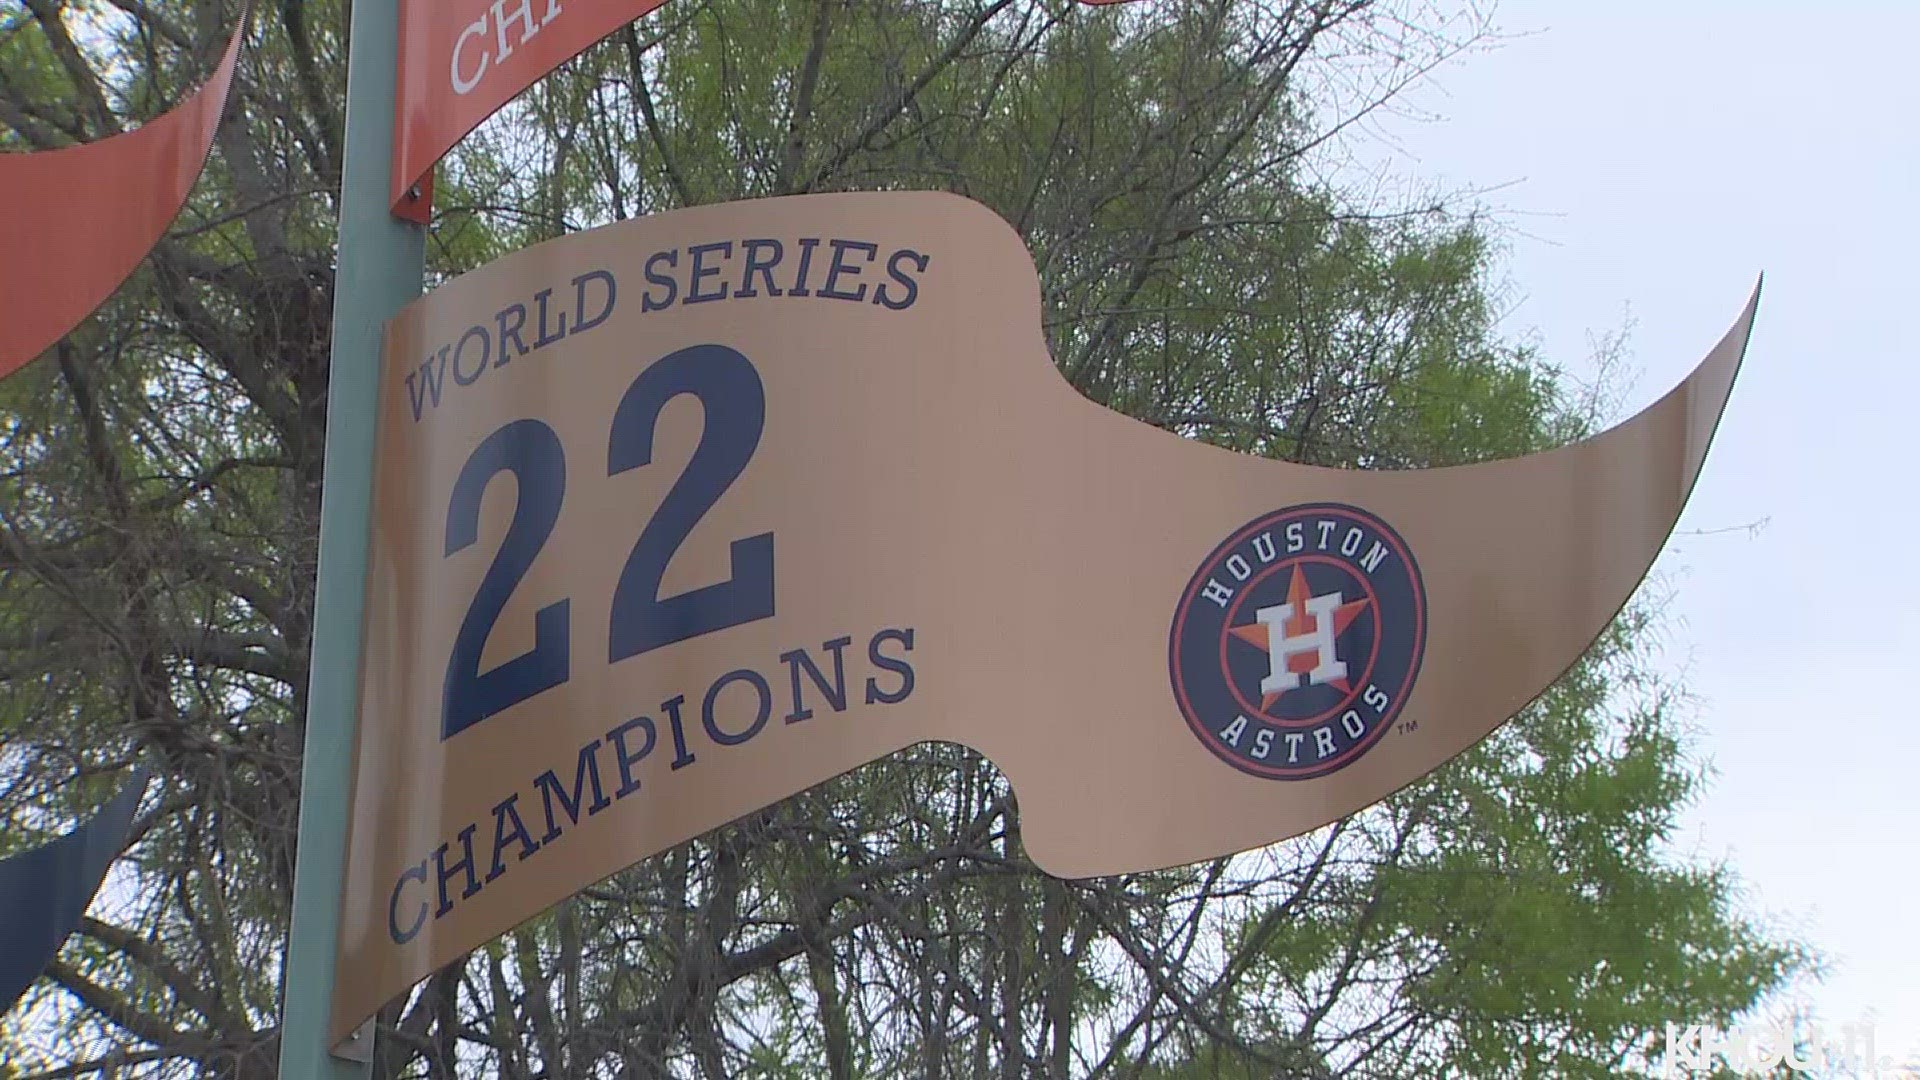 The gold pennant signifying the 2022 World Series Championship has been hung outside of Minute Maid Park.